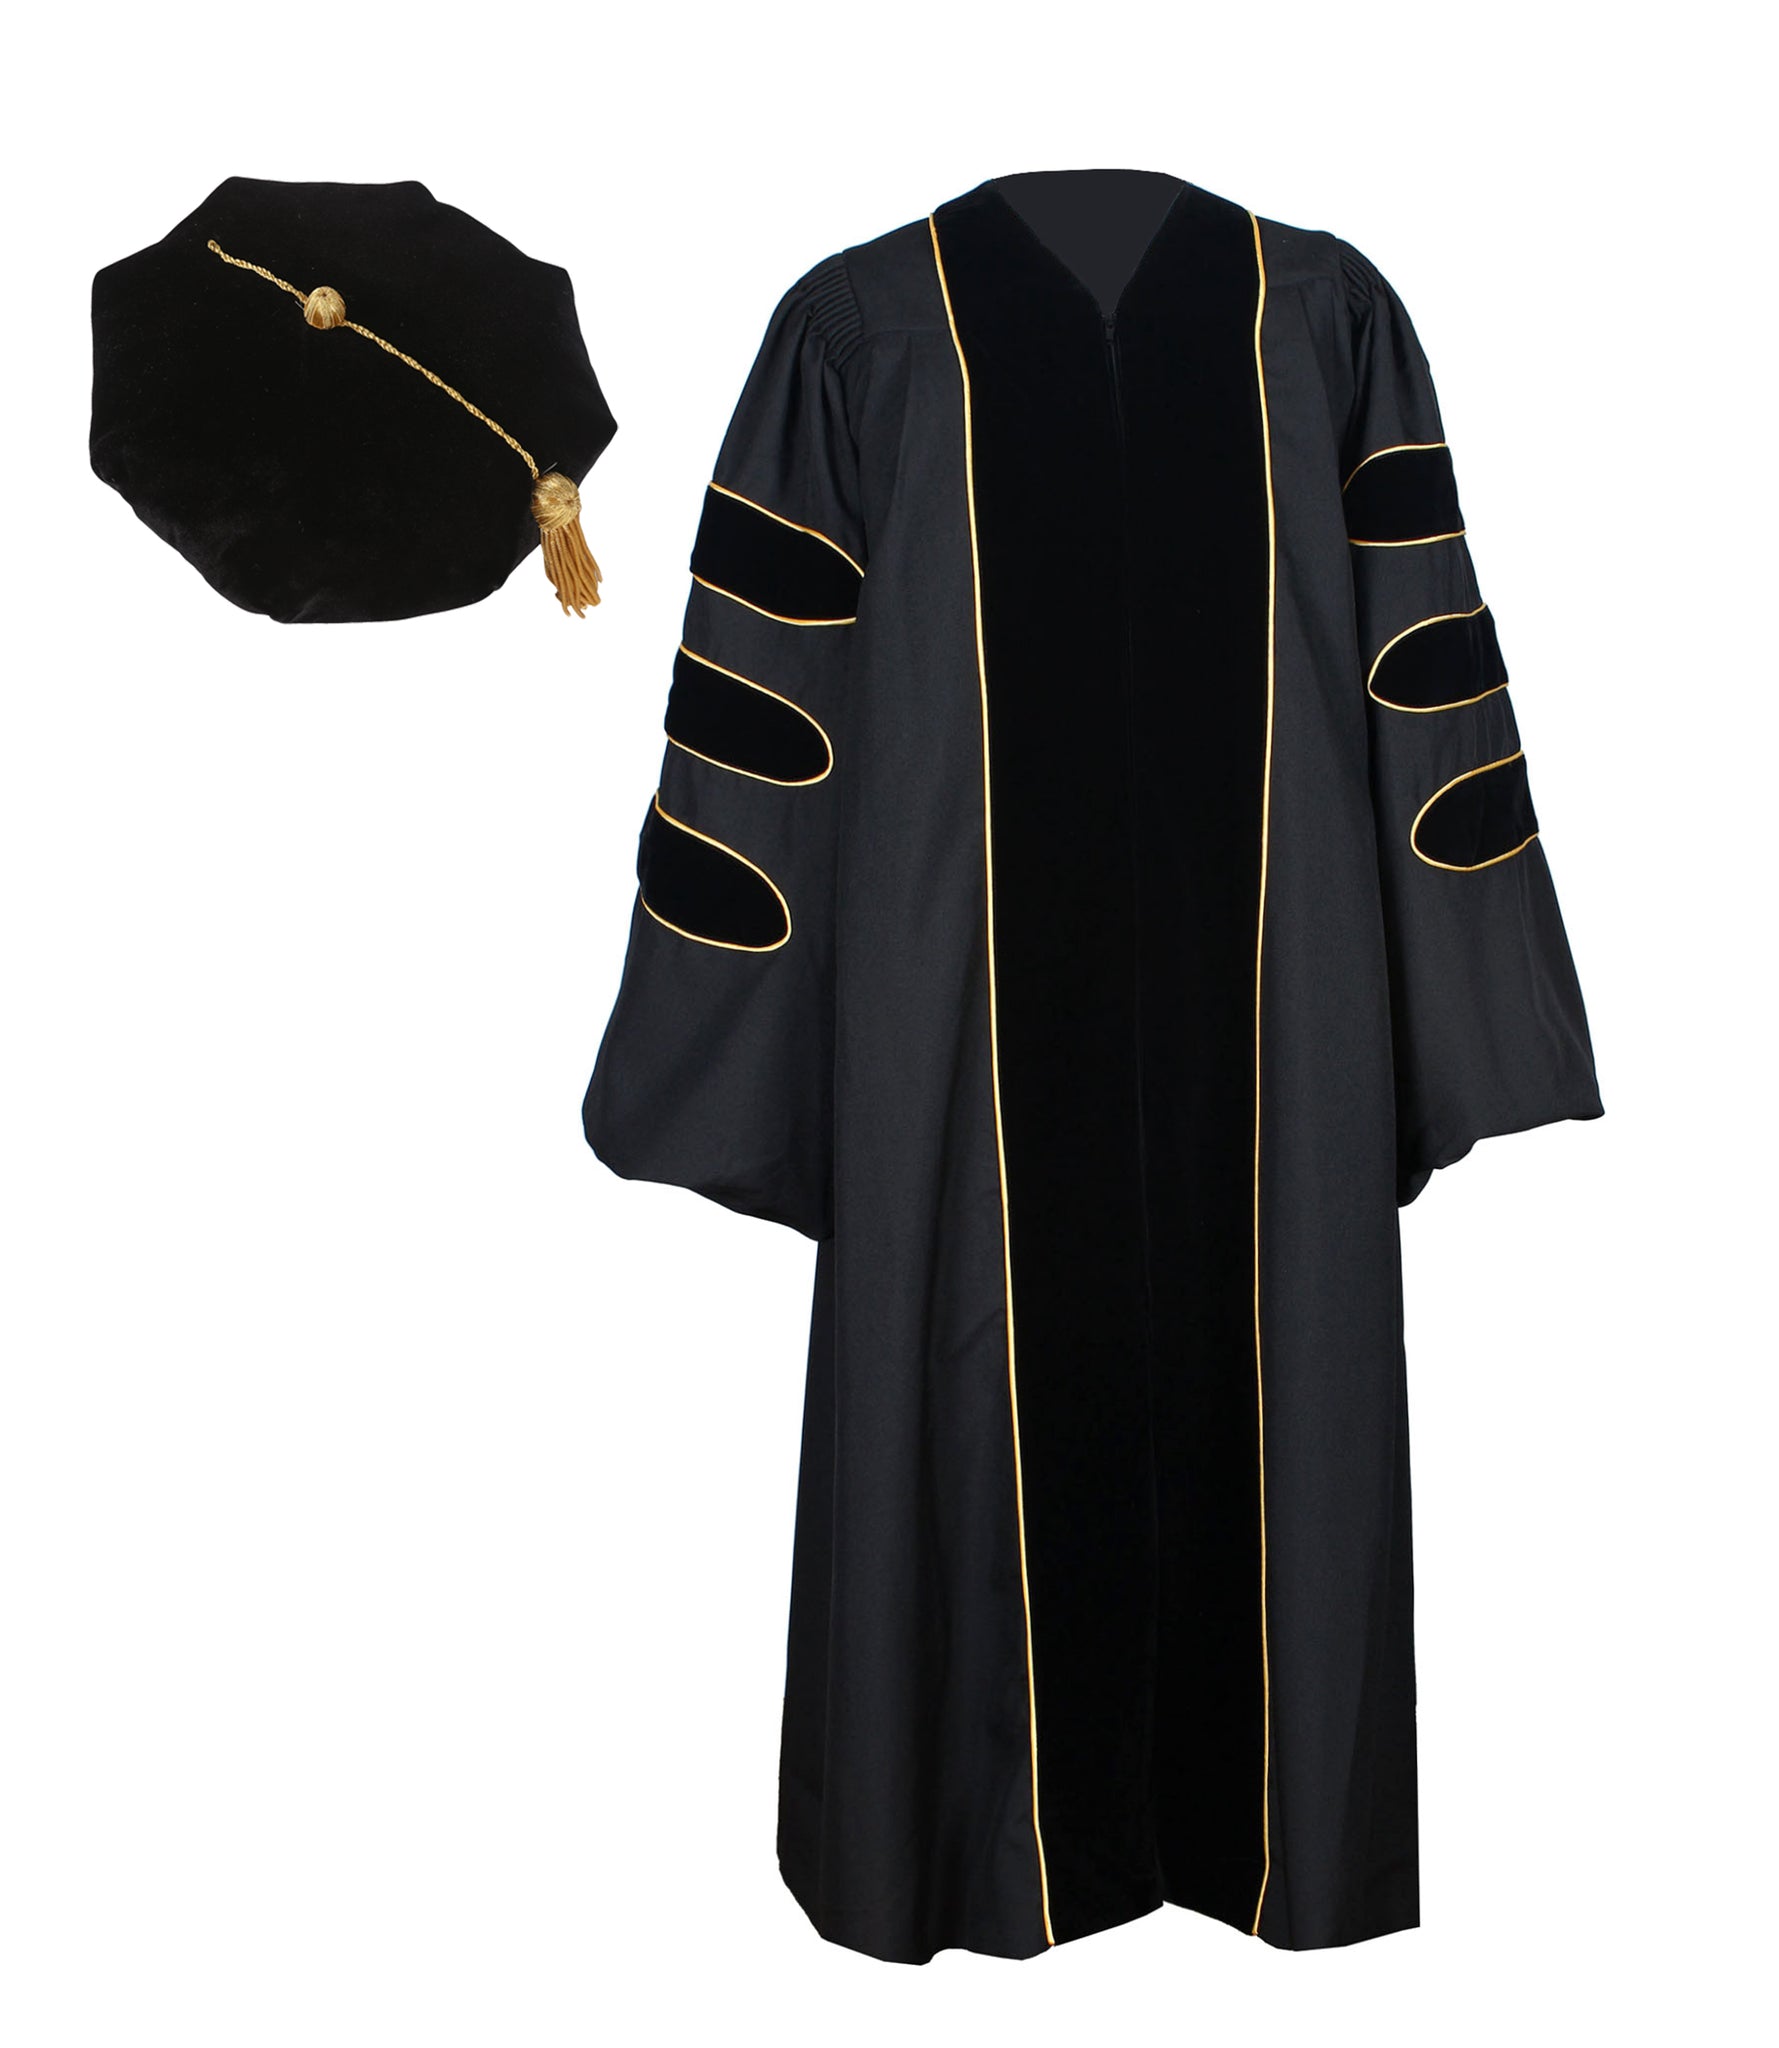 phd graduation doctoral gown